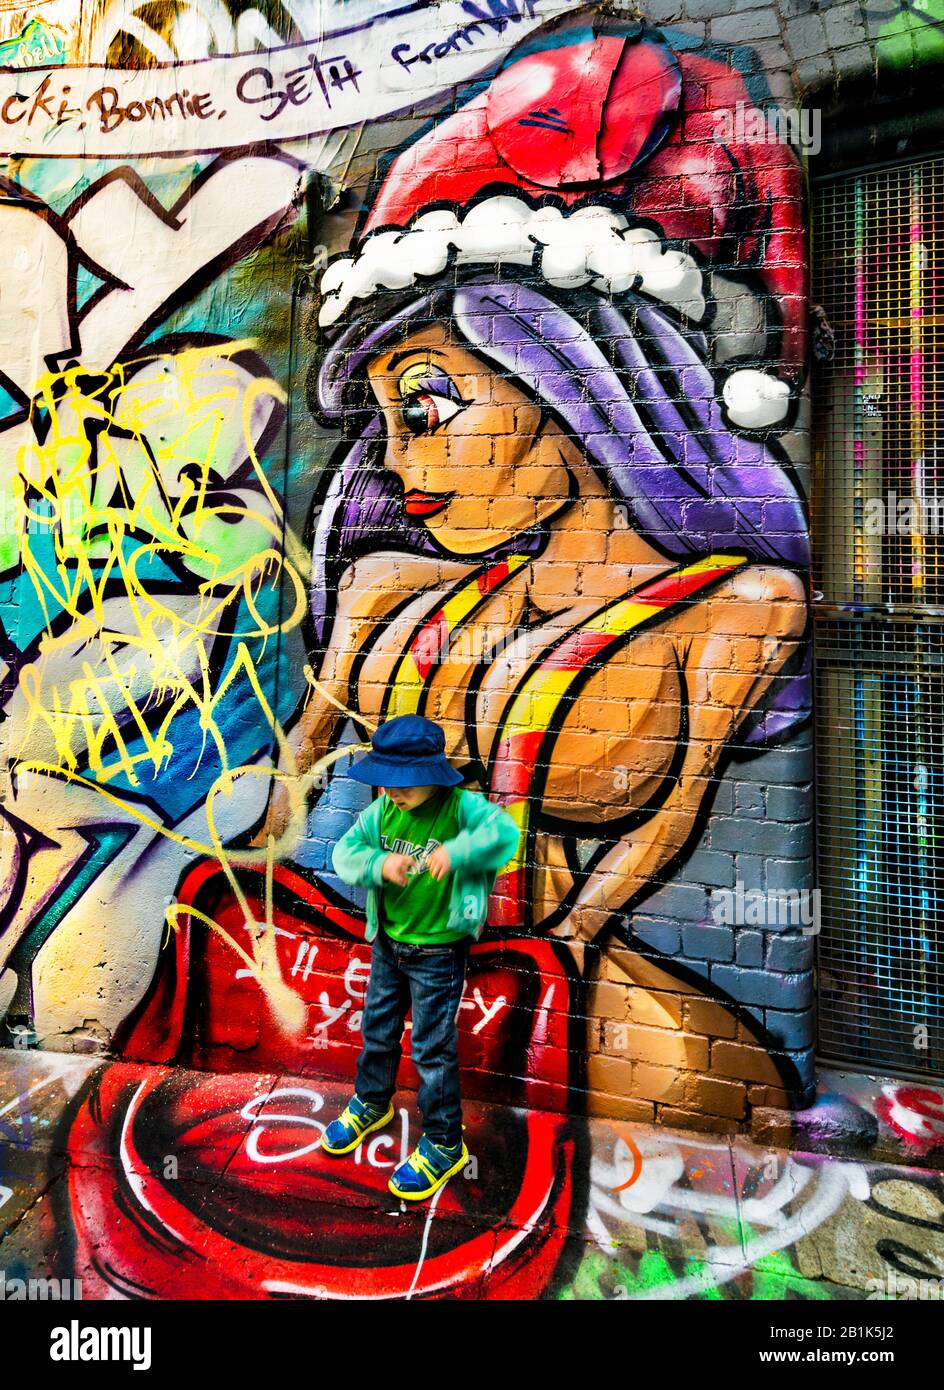 Large cartoon style graffiti painting of a woman with a xmas hat, and young boy standing in the street, Hosier Street, Melbourne Lanes, Melbourne, Vic Stock Photo